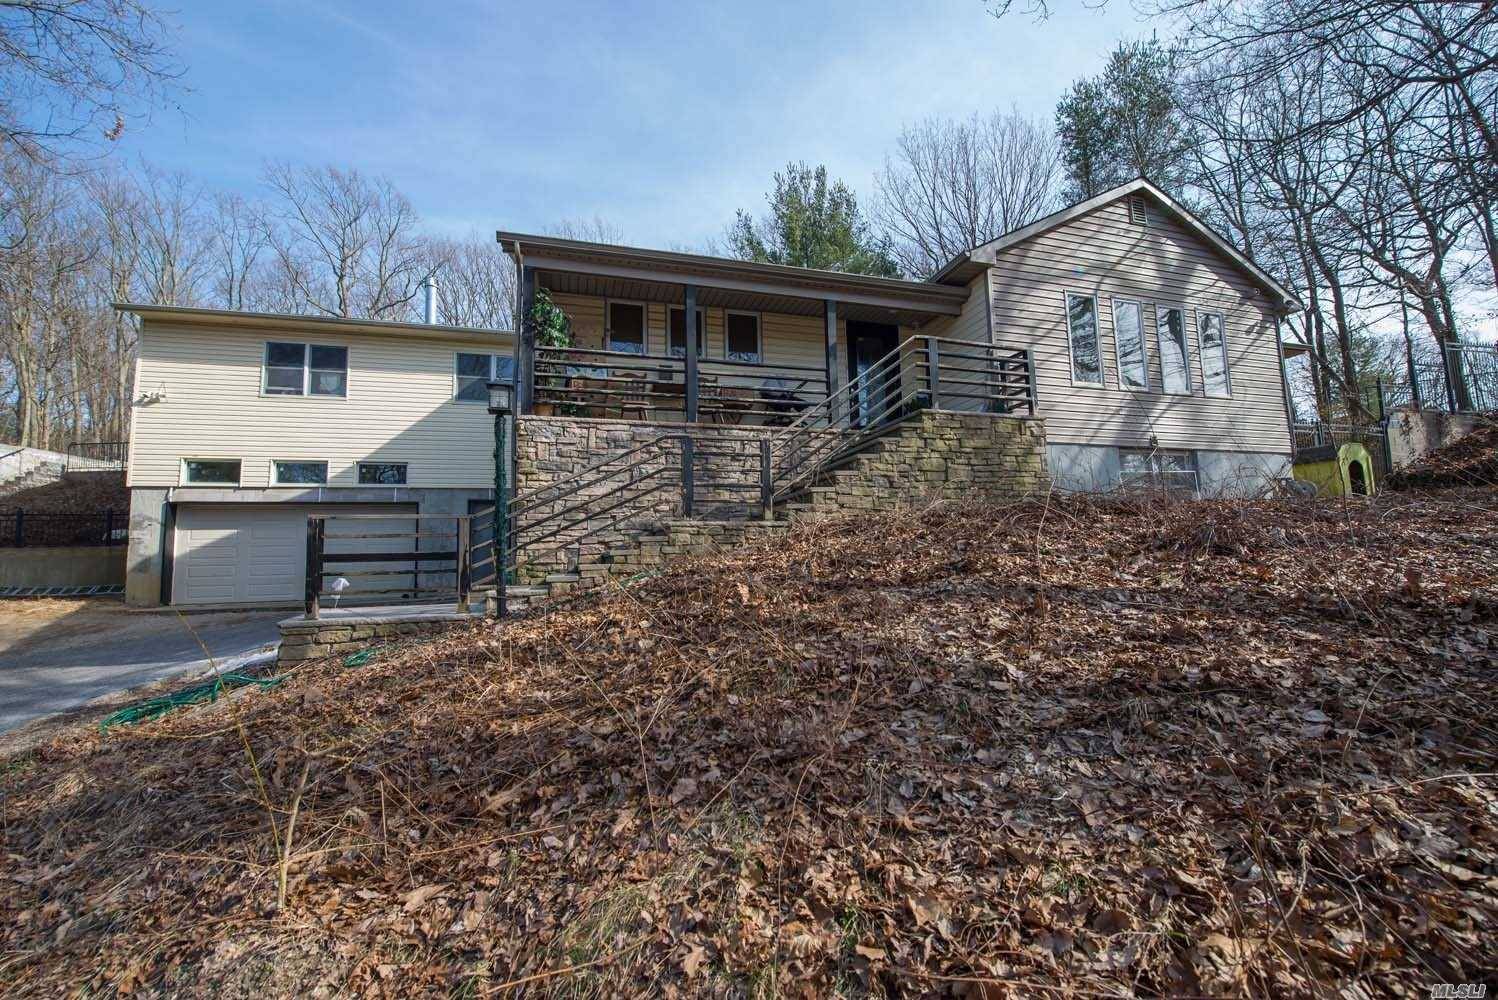 Nestled On Top Of A Secluded Hill, This Rare Expanded Ranch Is Nested On An Acre Of Property.